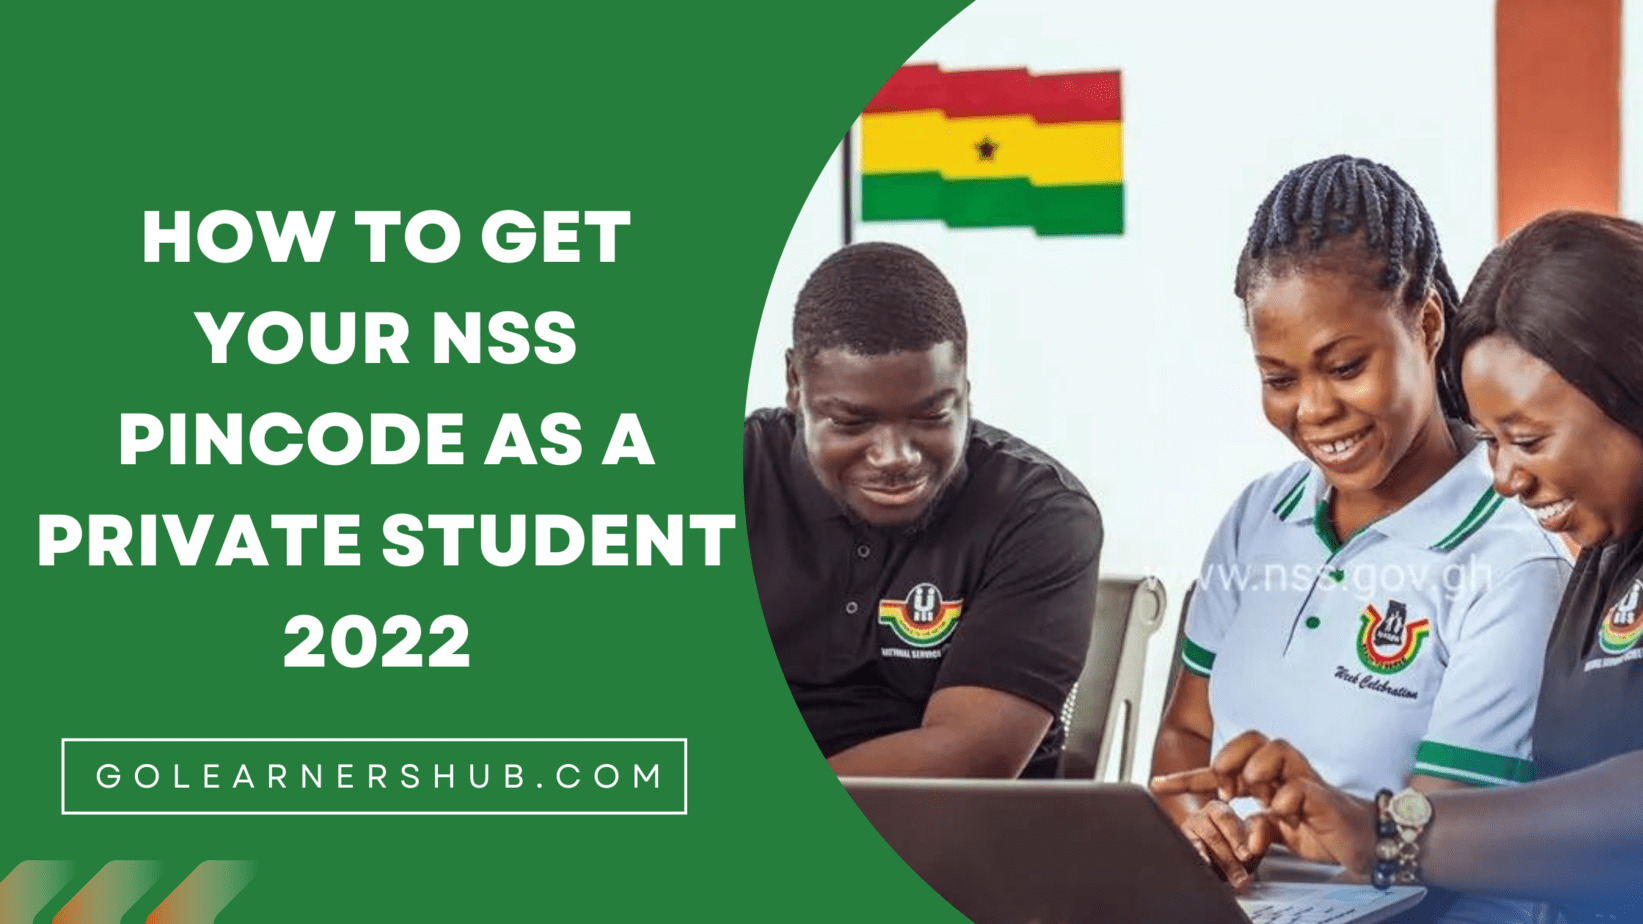 How to Get Your NSS Pincode As a Private Student